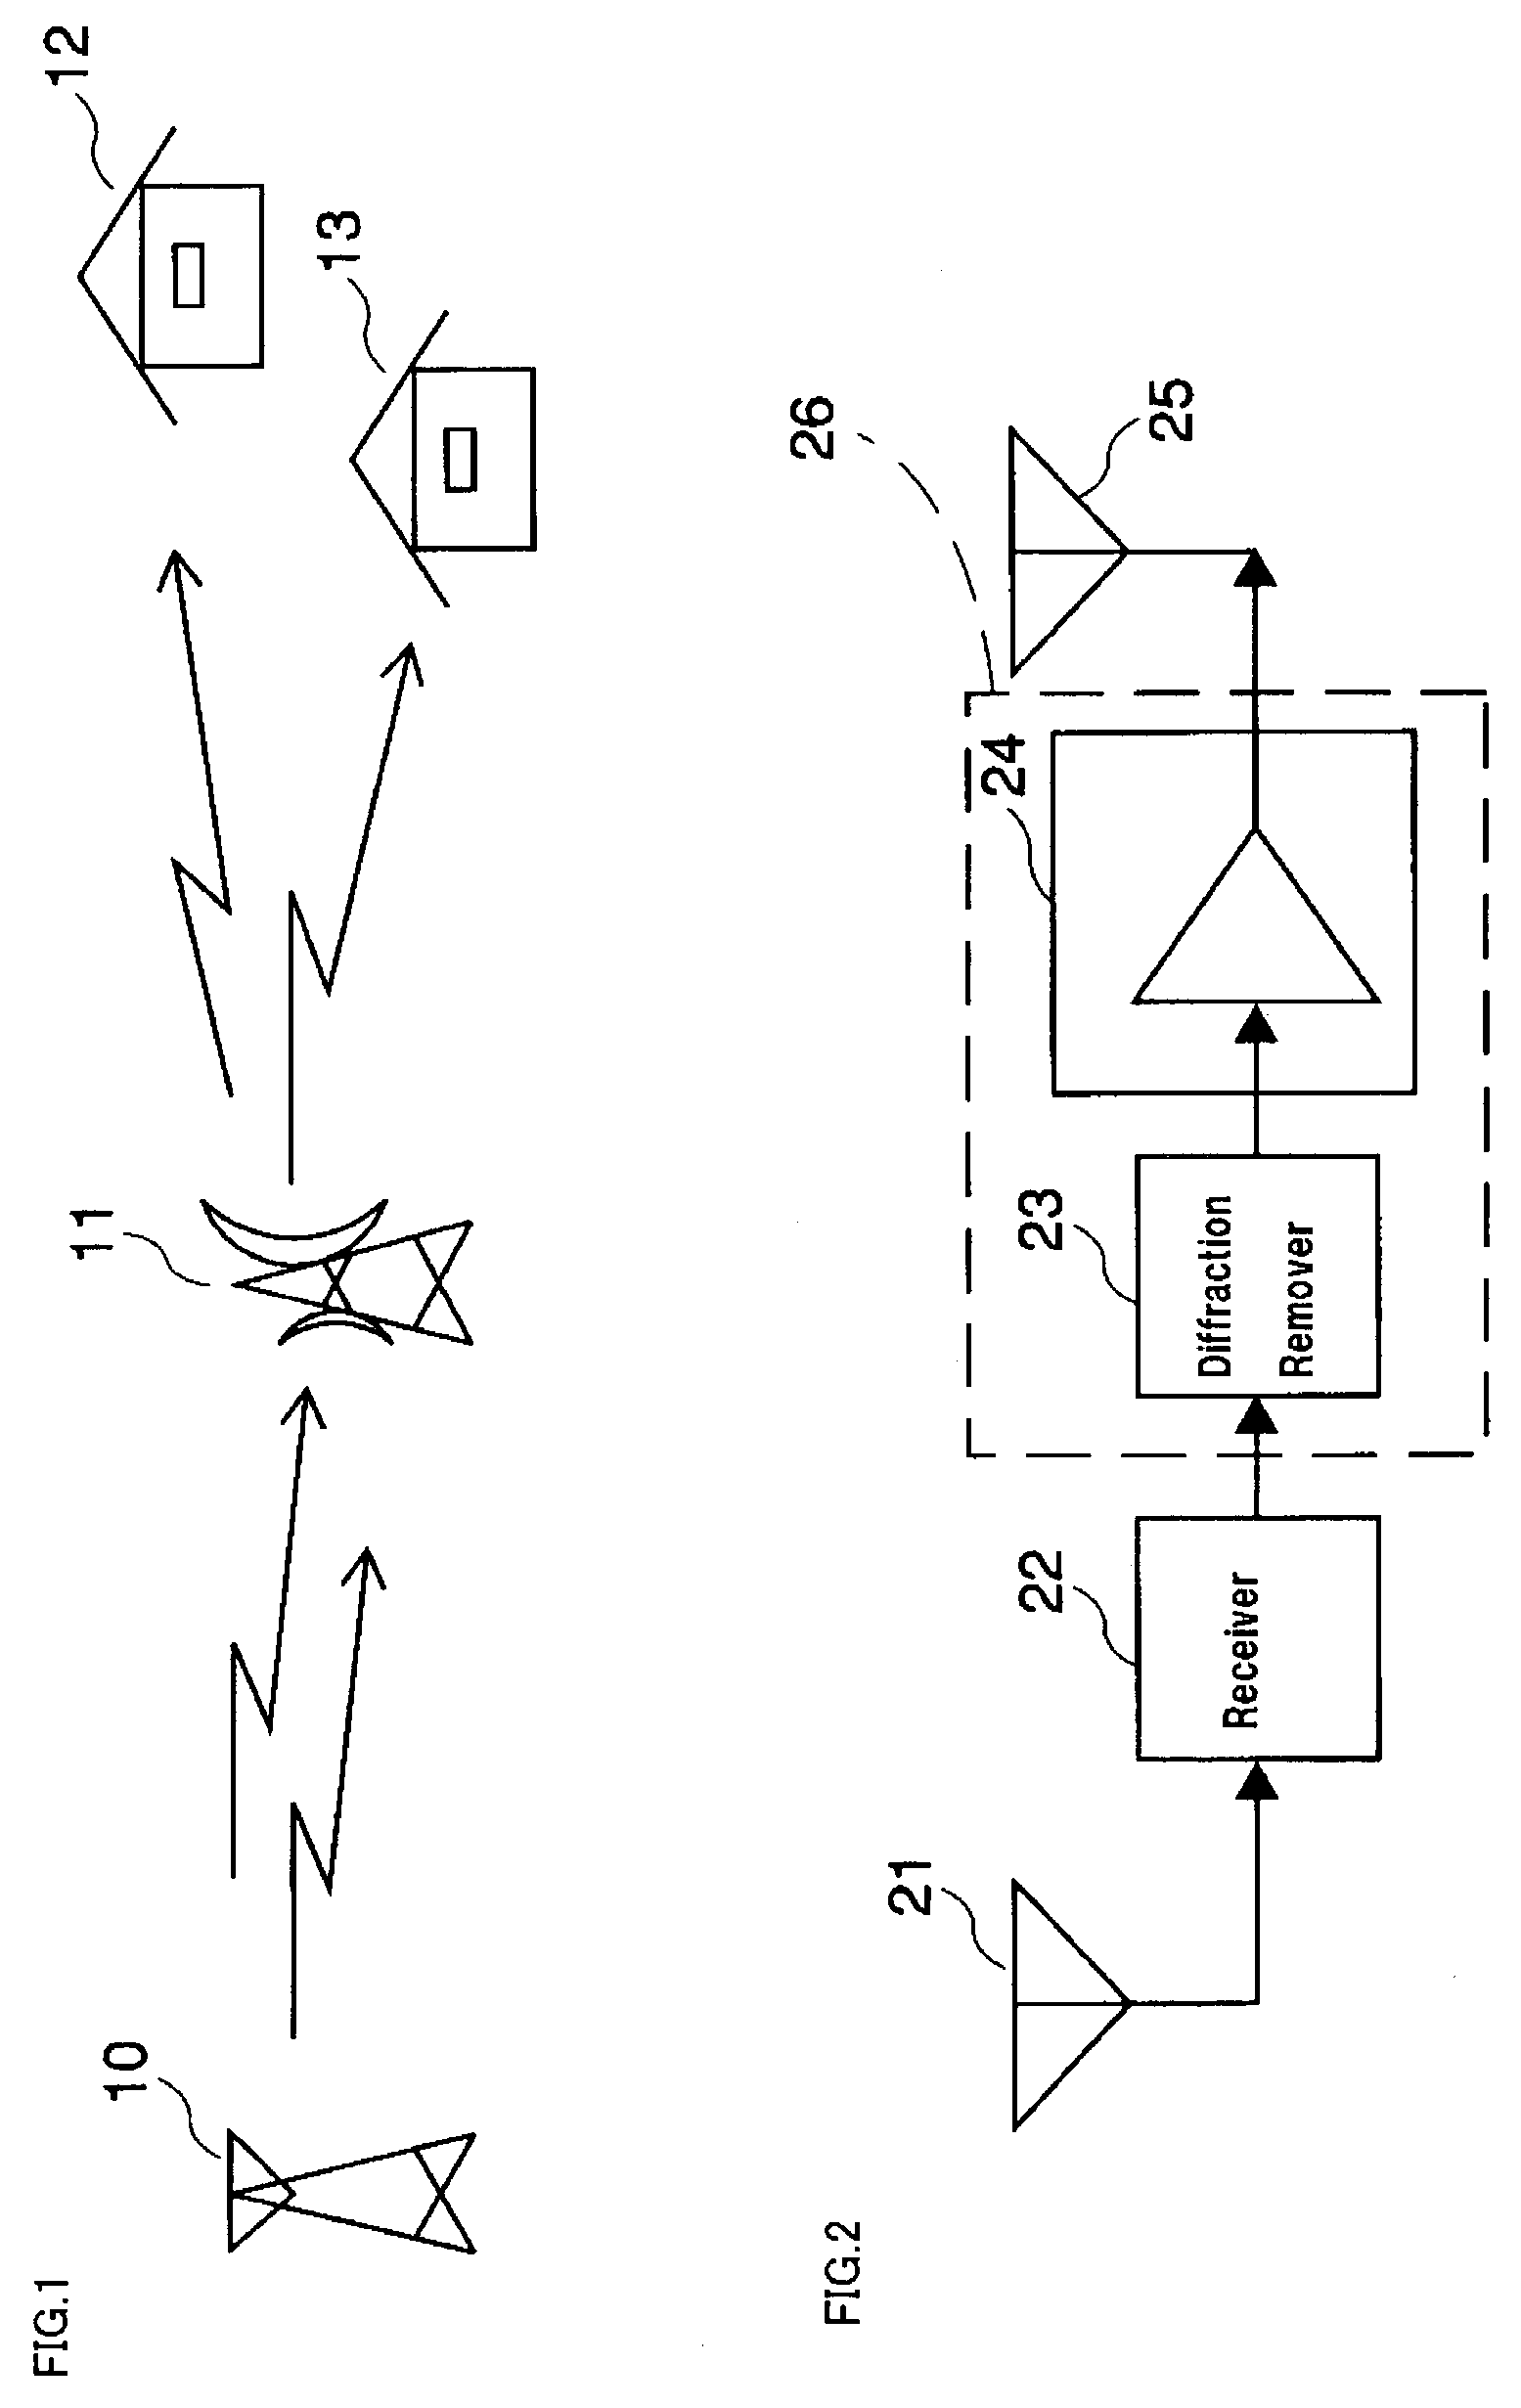 Nonlinear distortion compensating device